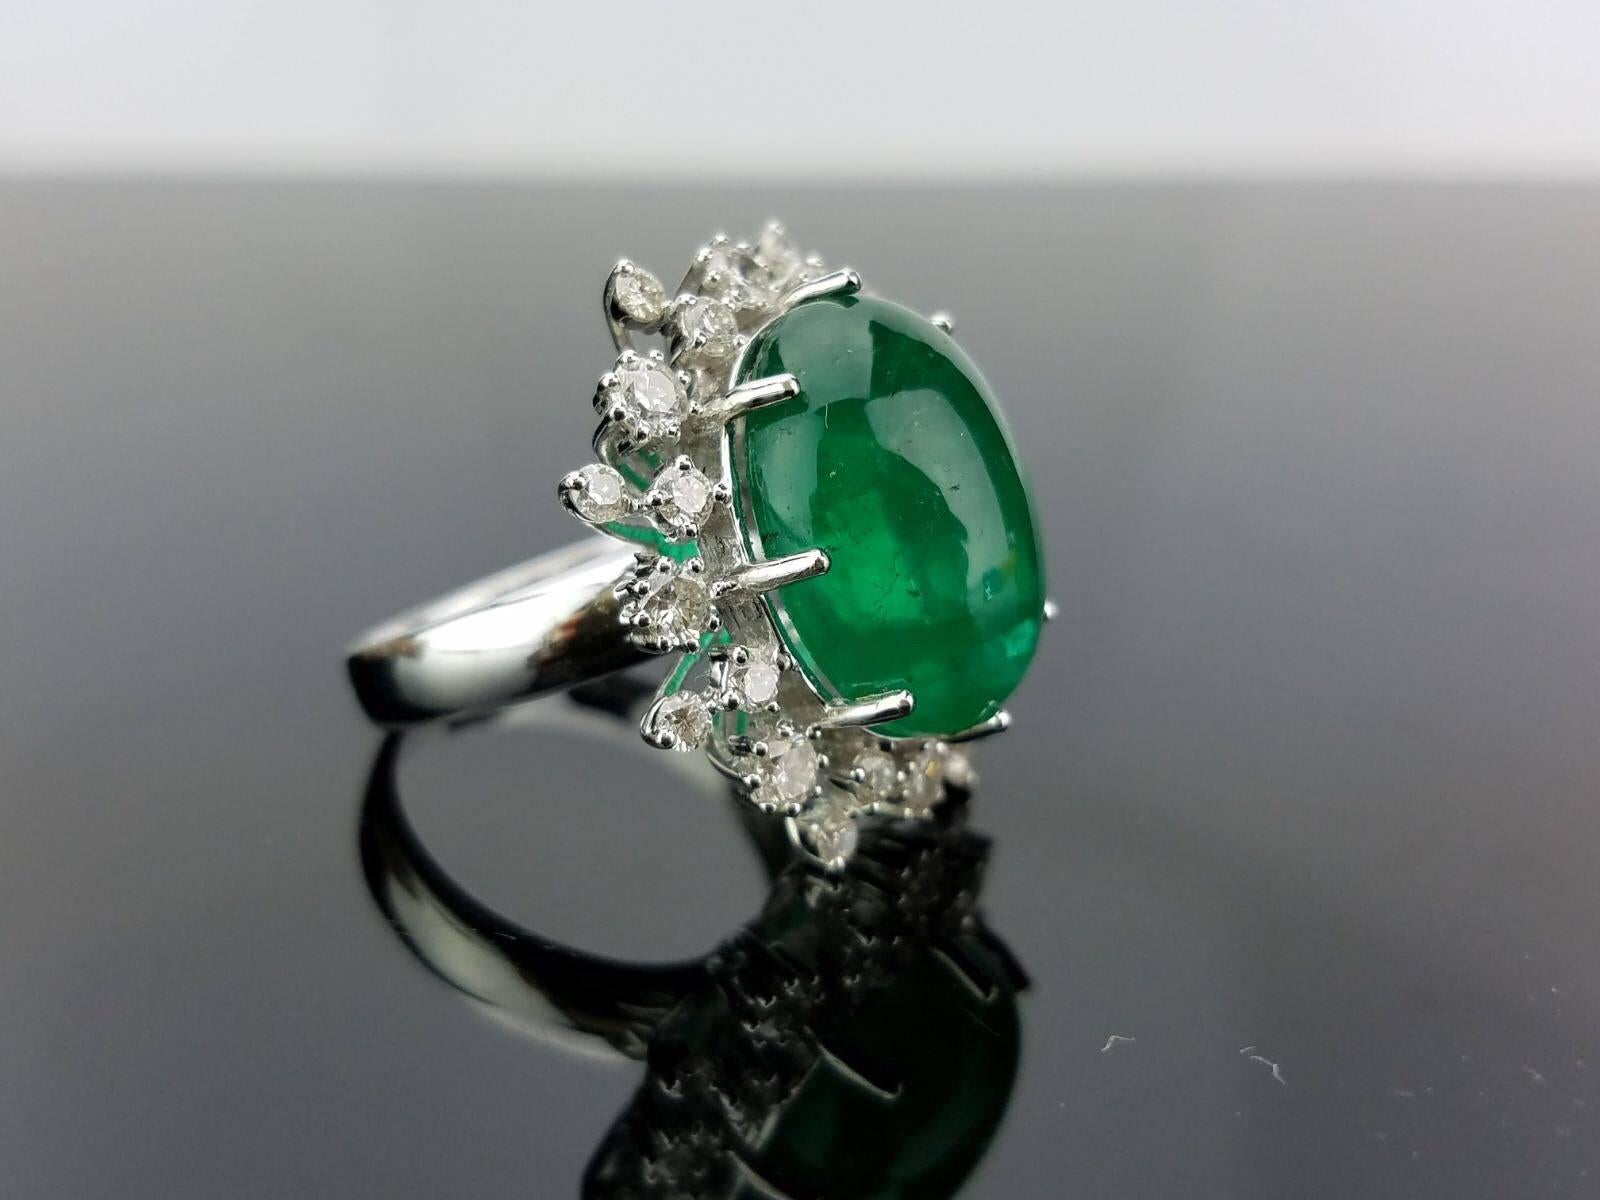 An elegant cocktail ring using a beautiful Emerald Cabochon centre stone surrounded with White Diamond, all set in 18K white gold. Currently a ring size US 6, but we can resize the ring for you without additional cost. 

Stone Details: 
Stone: